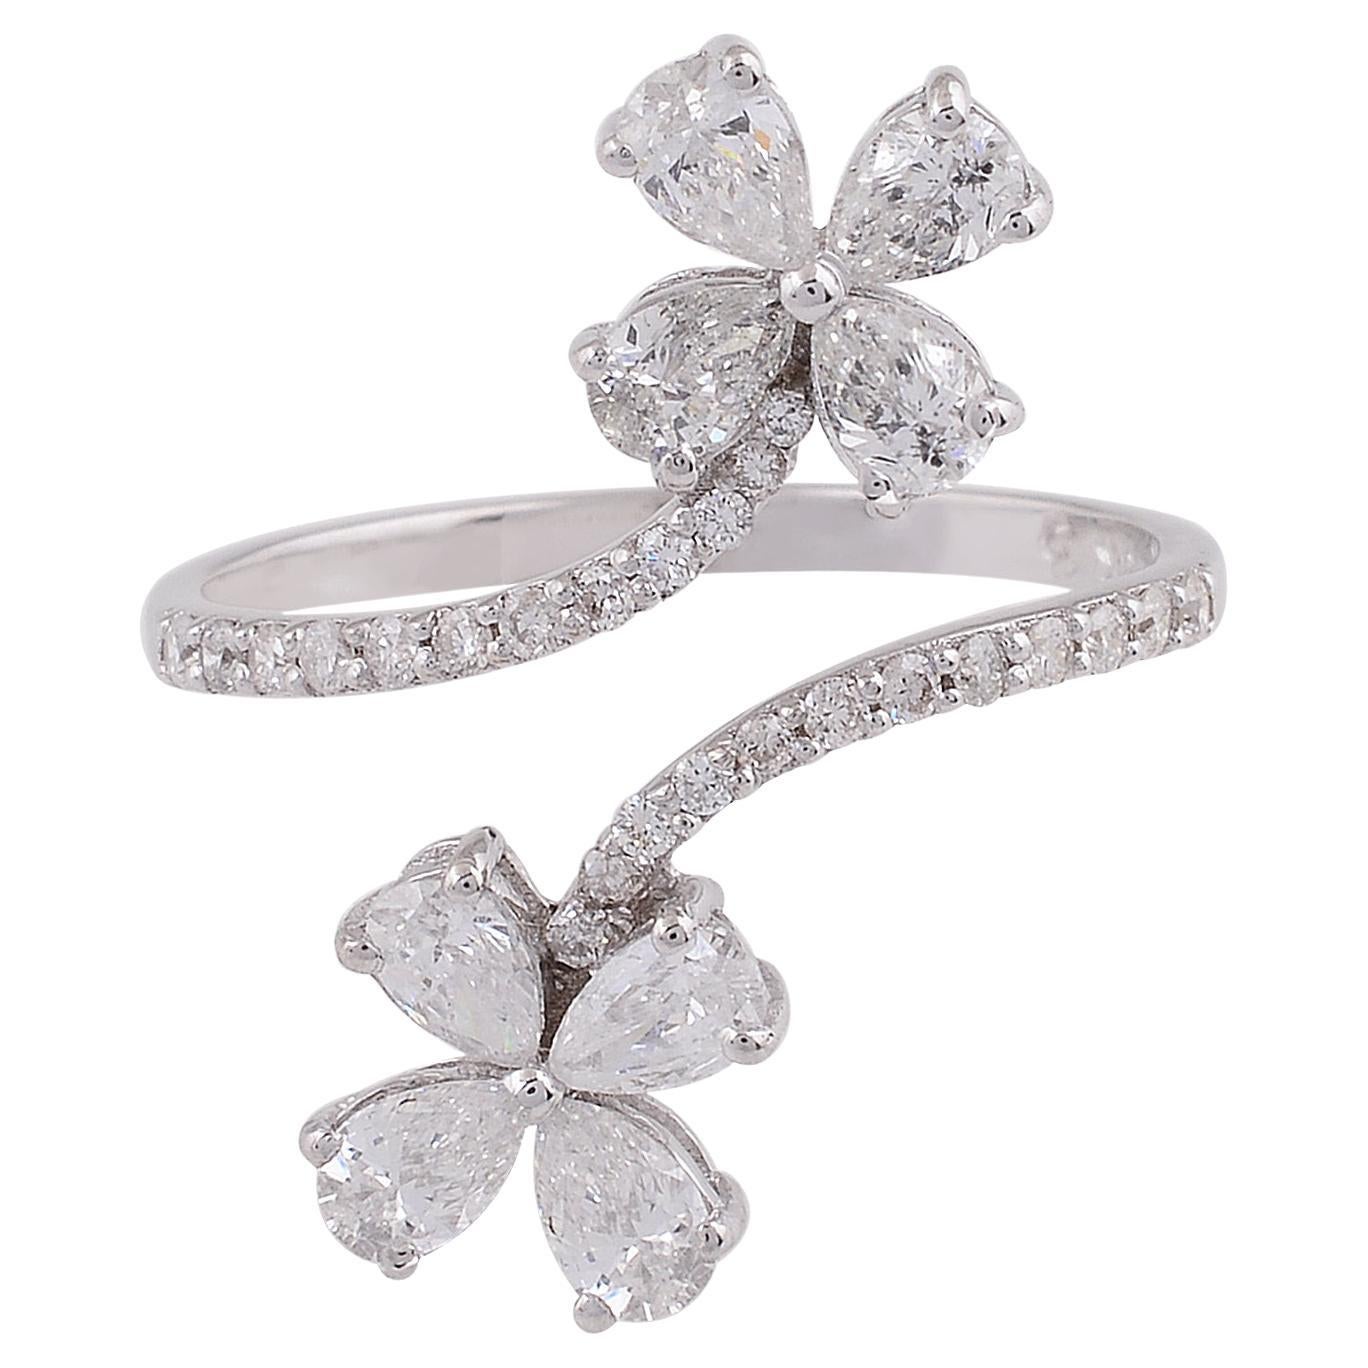 For Sale:  SI Clarity HI Color Pear Diamond Double Flower Wrap Ring 14k White Gold Jewelry